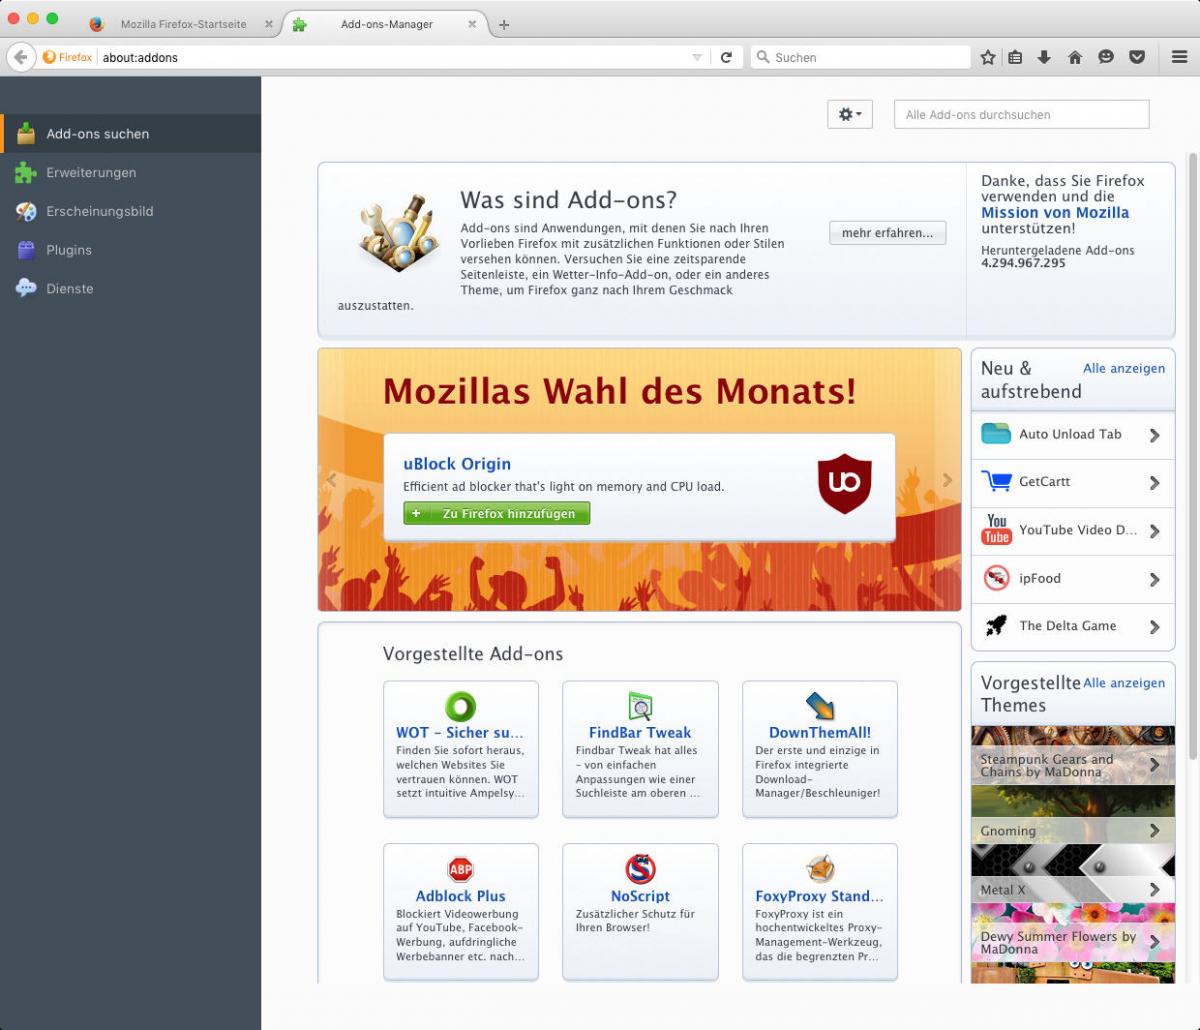 download firefox 45 for mac